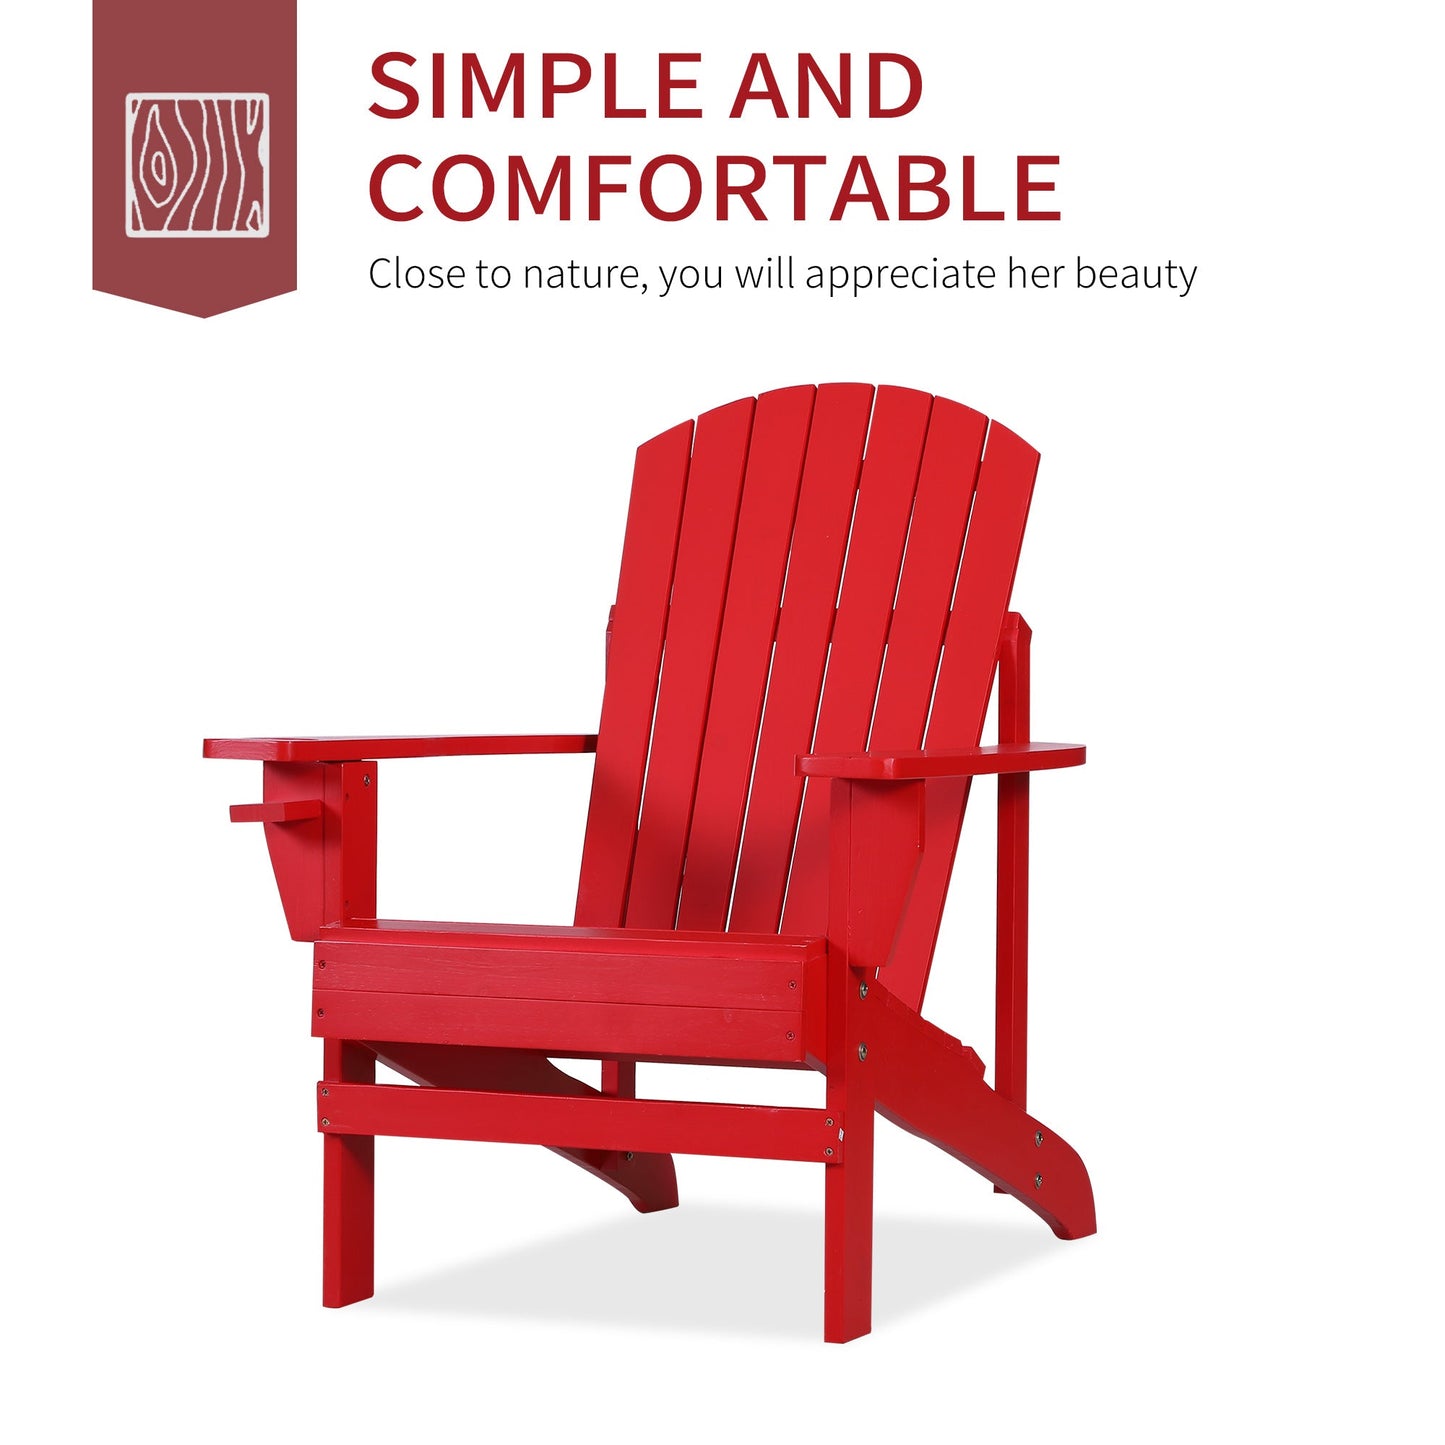 Outdoor and Garden-Oversized Adirondack Chair, Outdoor Fire Pit and Porch Seating, Classic Log Lounge w/ Built-in Cupholder for Patio, Lawn, Deck, Red - Outdoor Style Company